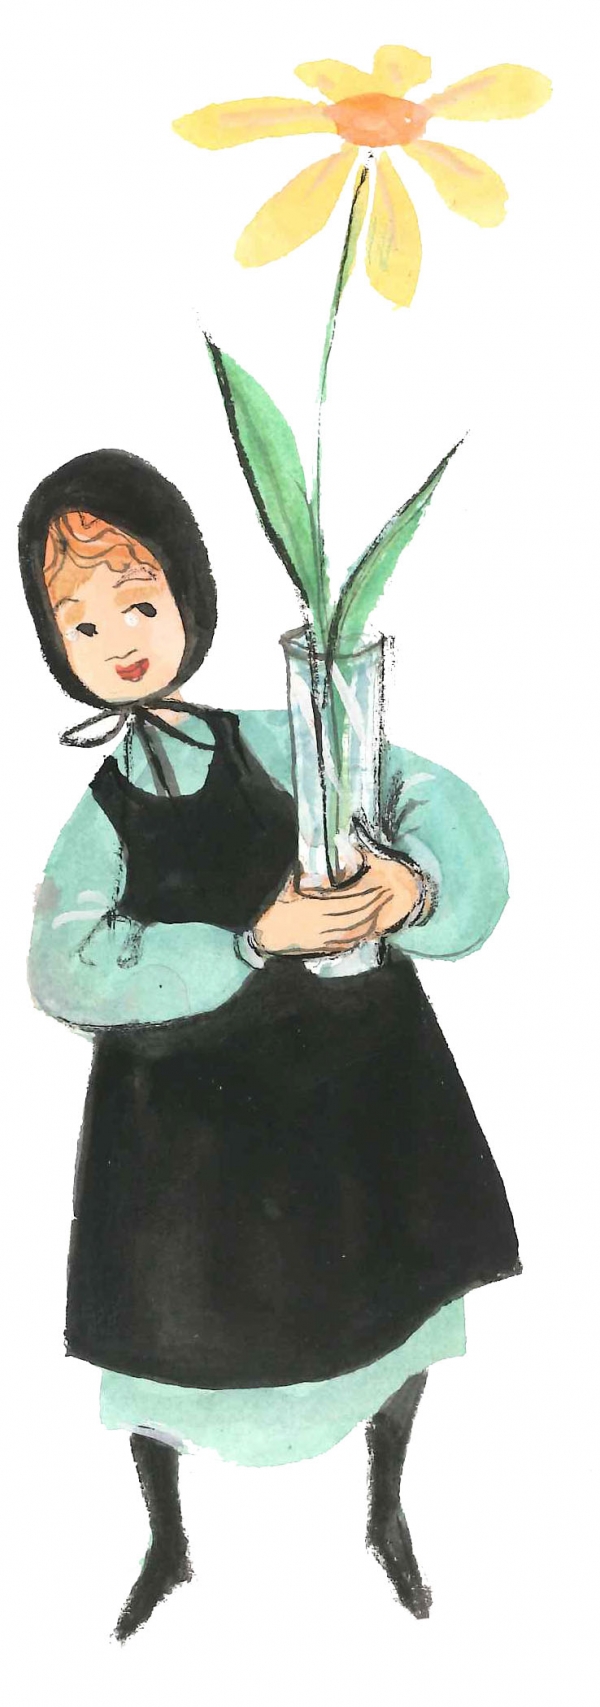 Little Marguerite limited edition print by P Buckley Moss is printed in respect to all P.E.O. groups across the country for their work in assisting women in education.